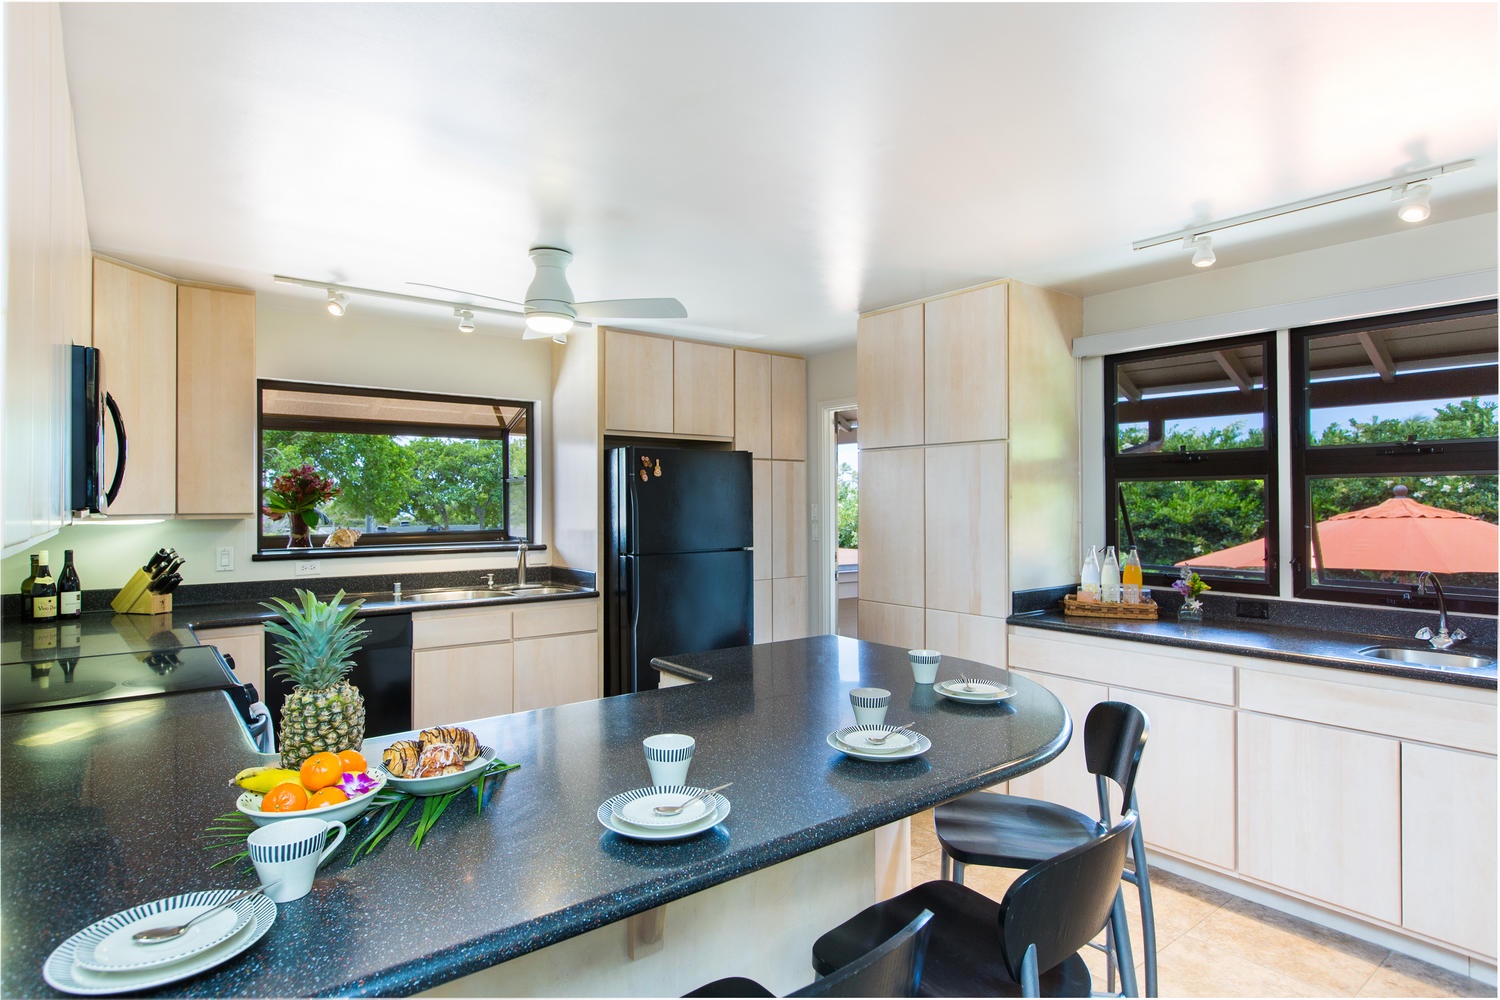 Honolulu Vacation Rentals, Hale Poola - Kitchen, conveniently located near the outdoor patio and dining room.